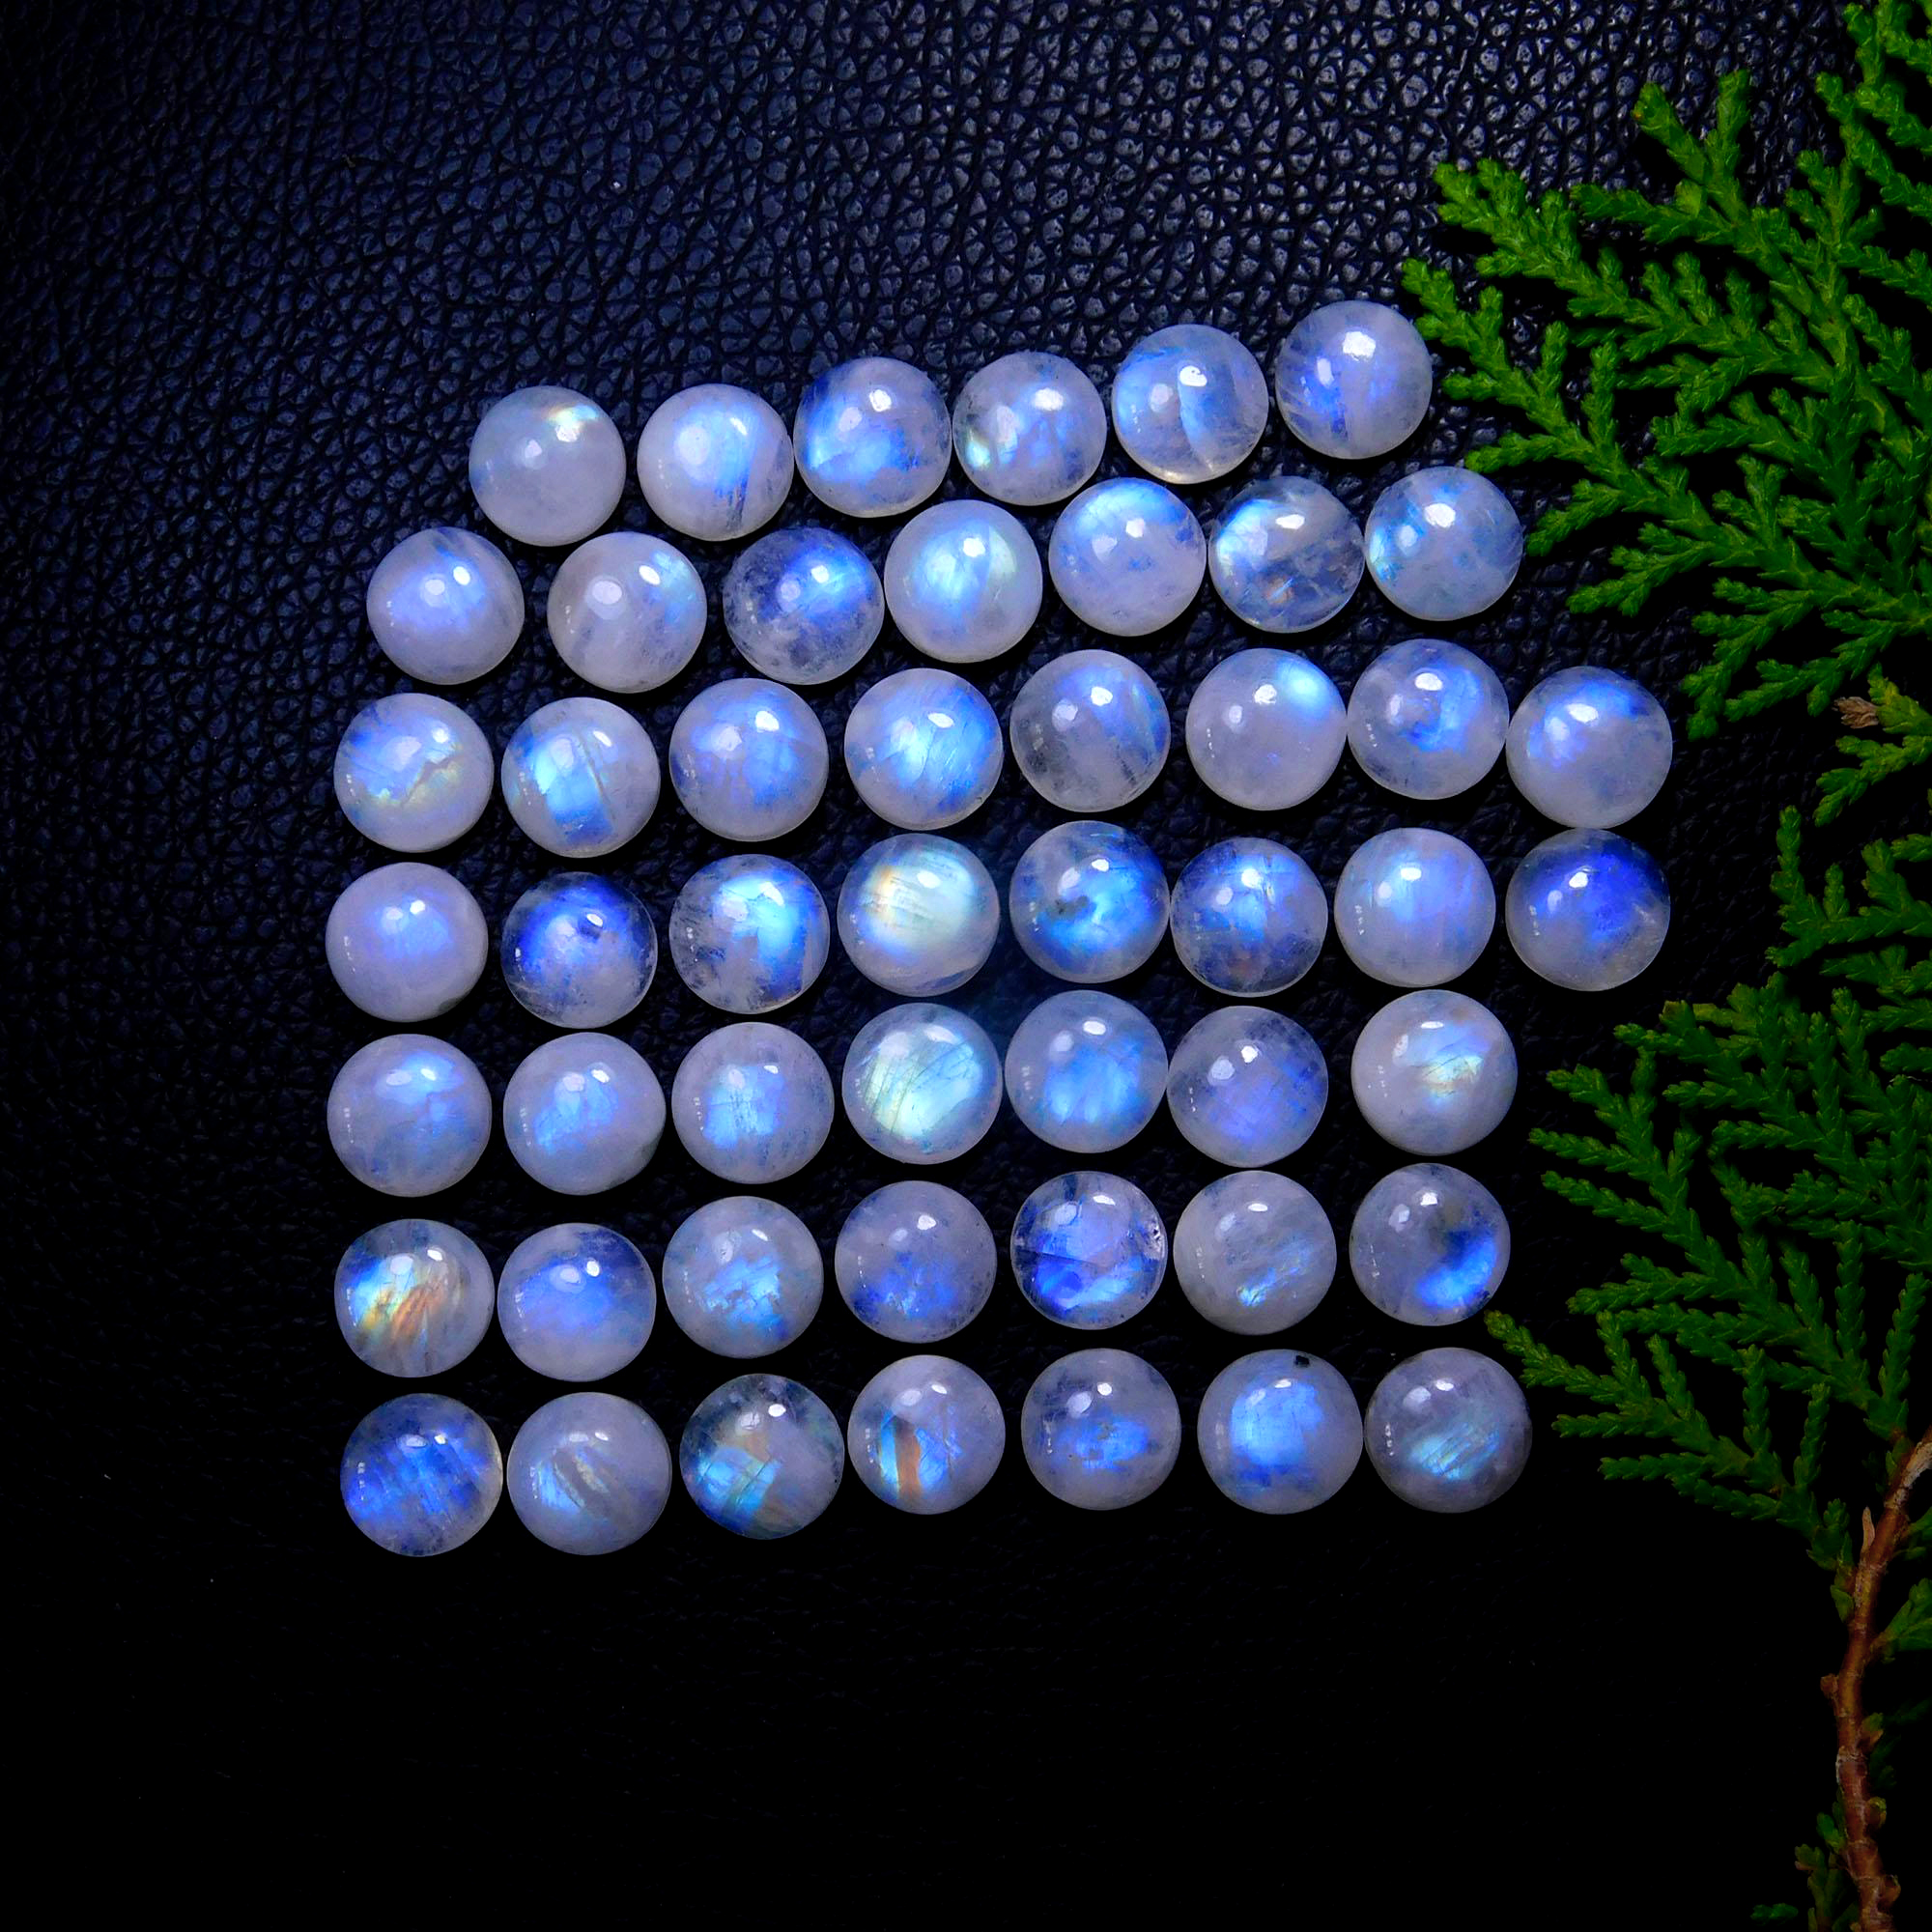 40Pcs 167Cts Natural Rainbow Moonstone Round Shape Blue Fire Cabochon Lot Loose Gemstone Jewelry Moonstone Ring For Gift 10x10mm #9785